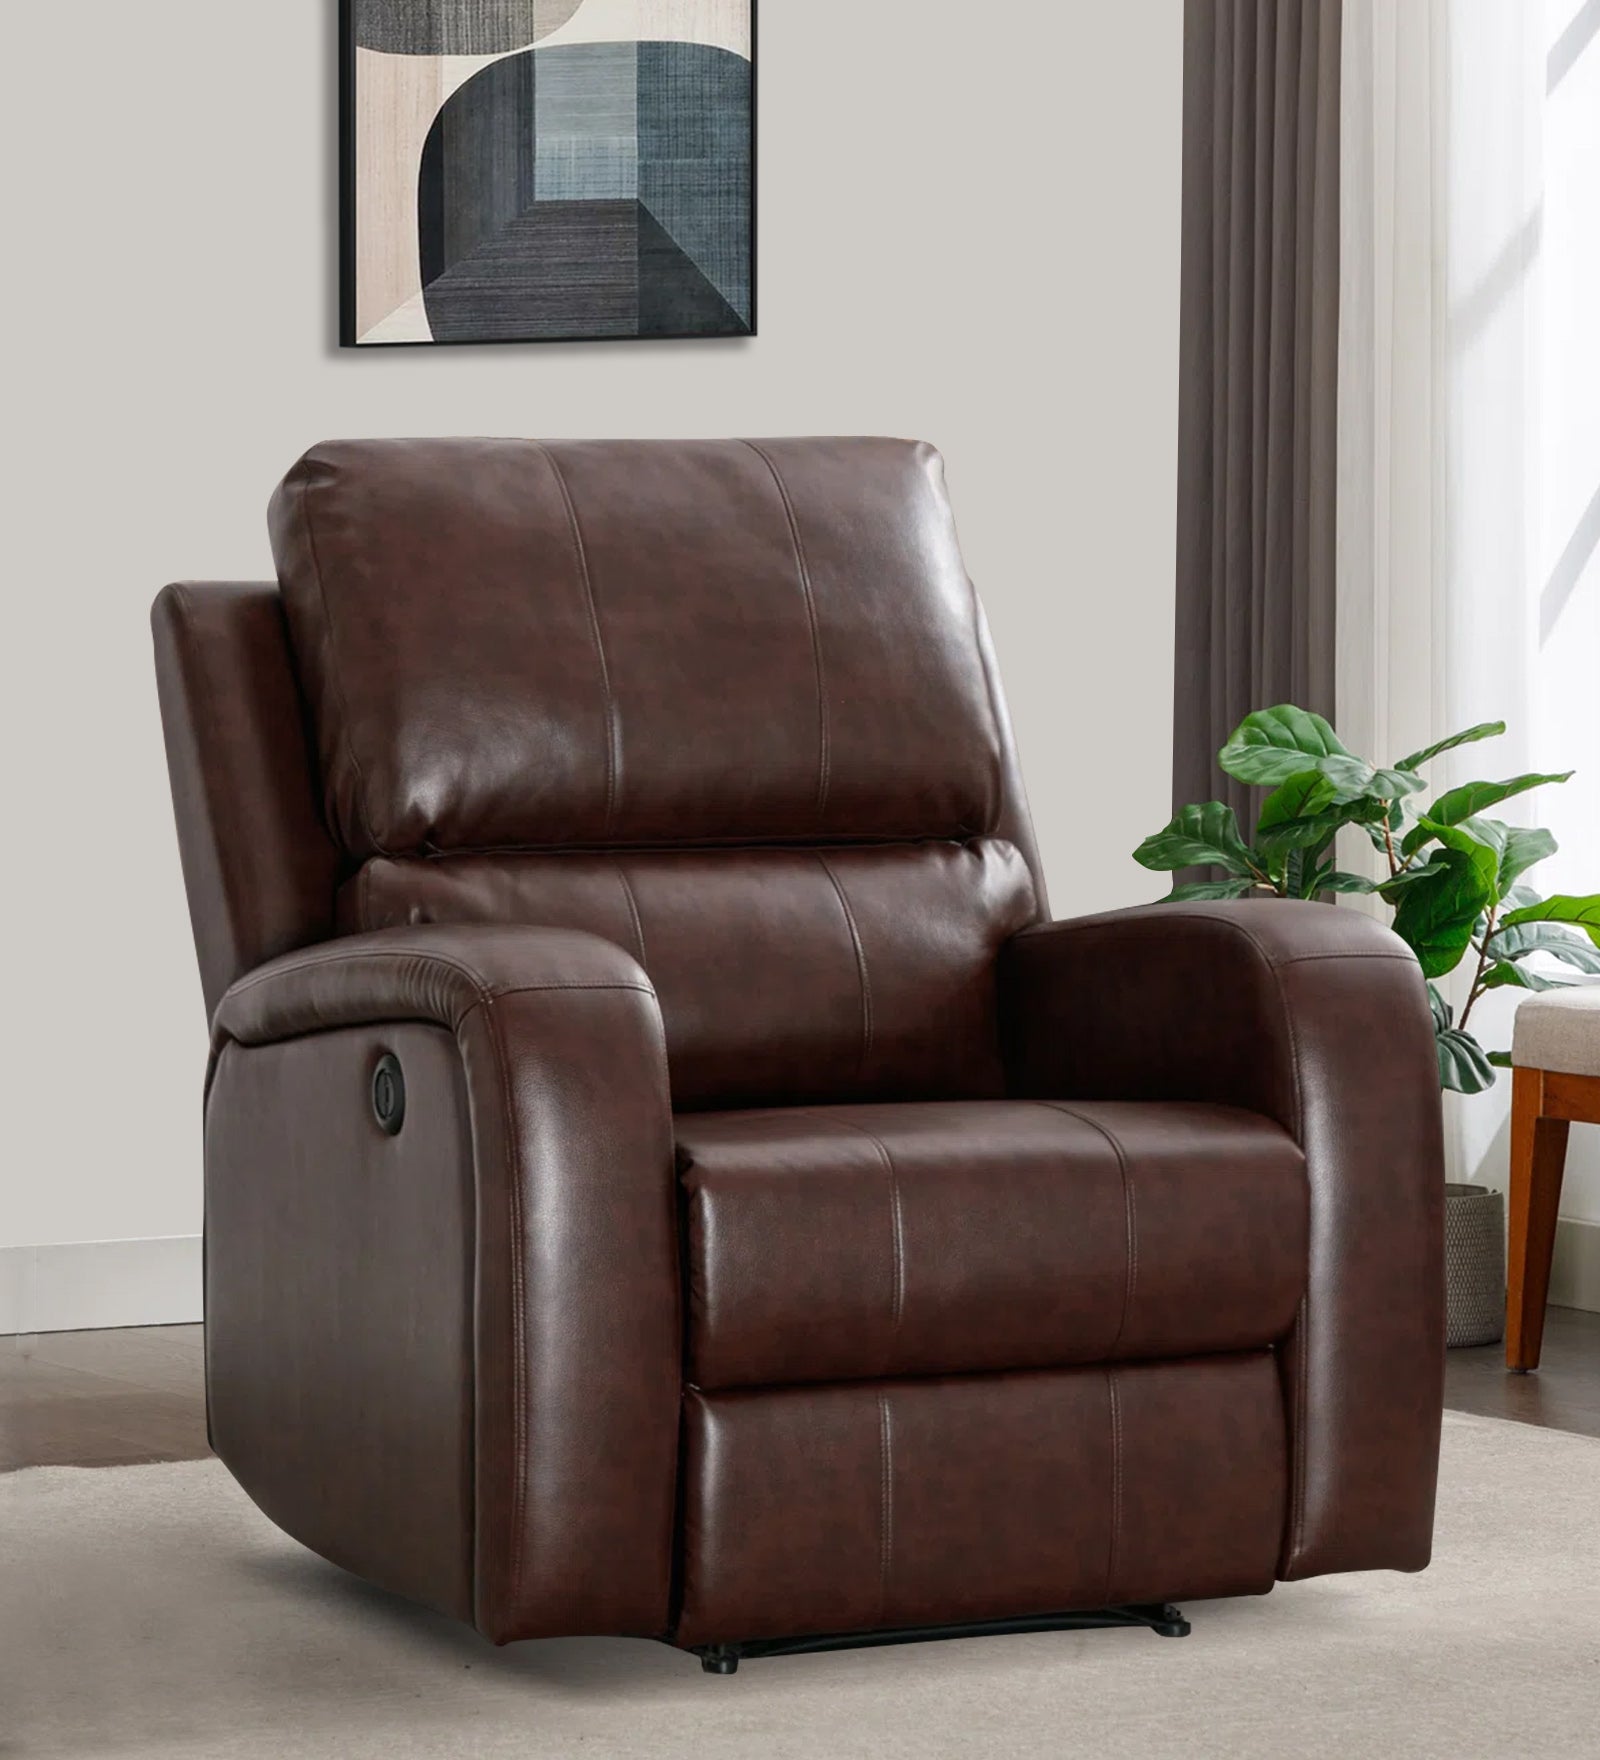 Mason Leather Motoorized 1 Seater Recliner In Dark Brown Faux Leather Finish